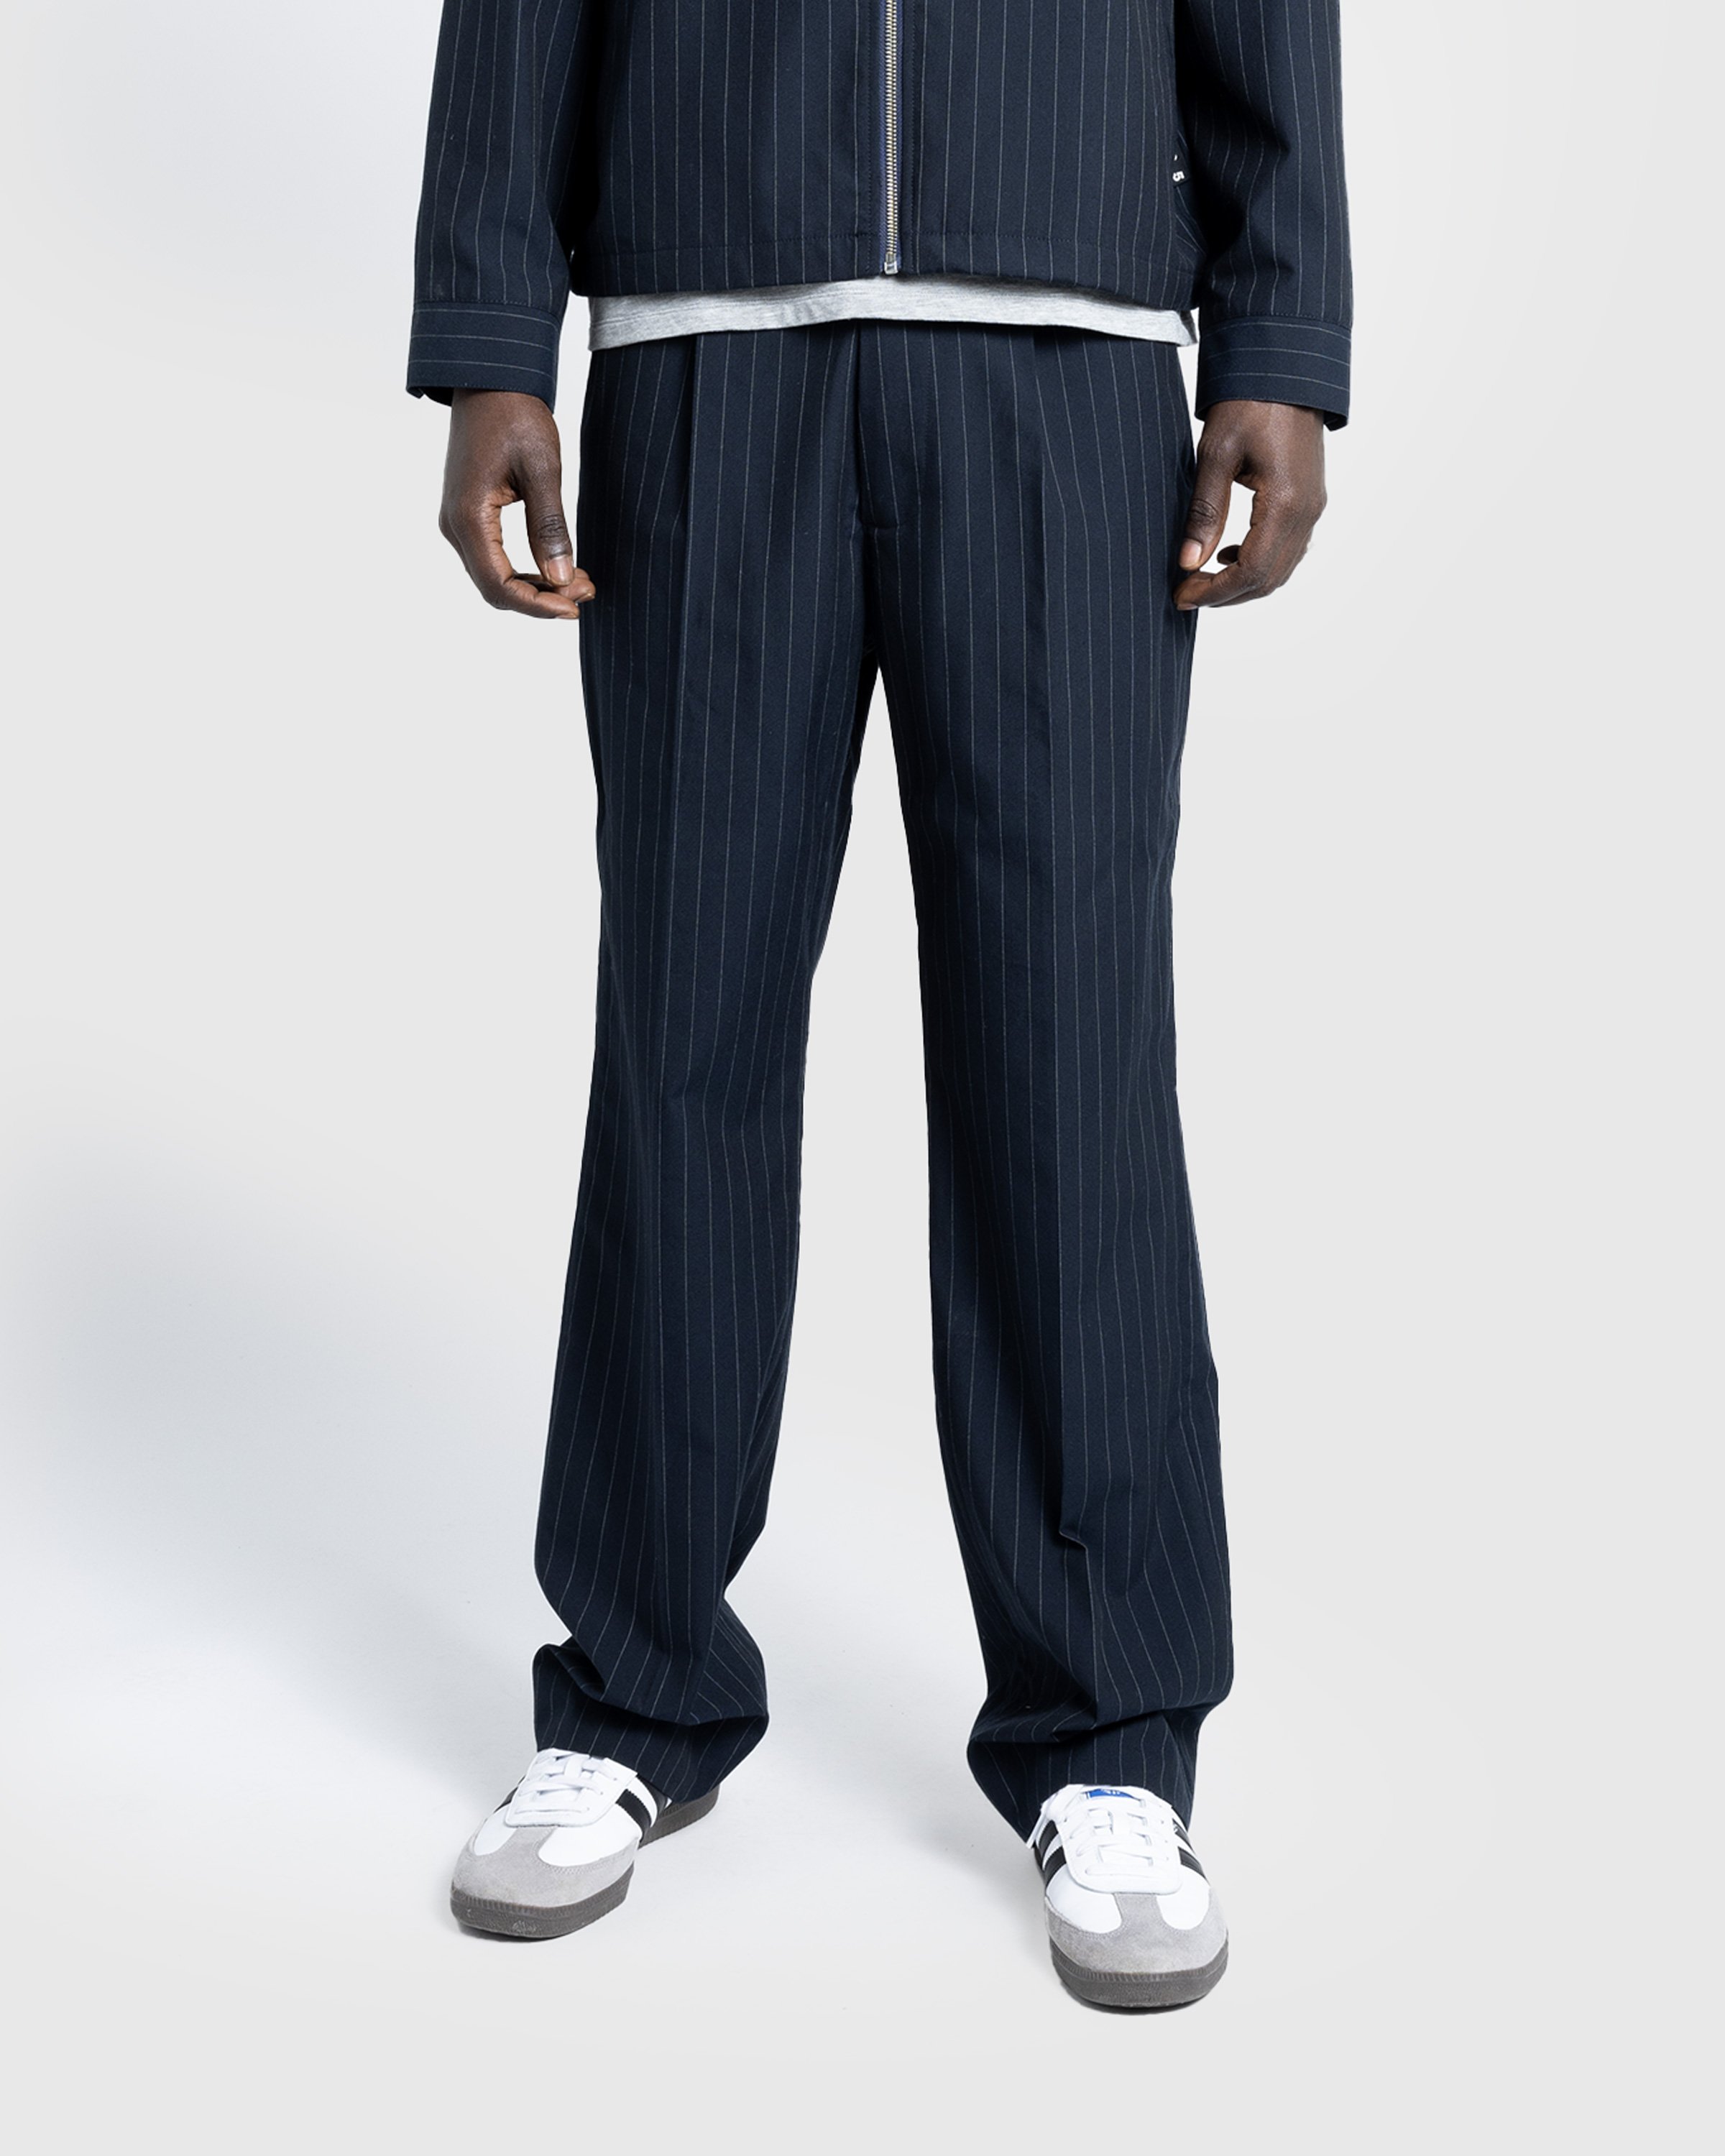 Highsnobiety HS05 - Tropical Suiting Pants Navy Striped - Clothing - Navy Striped - Image 3